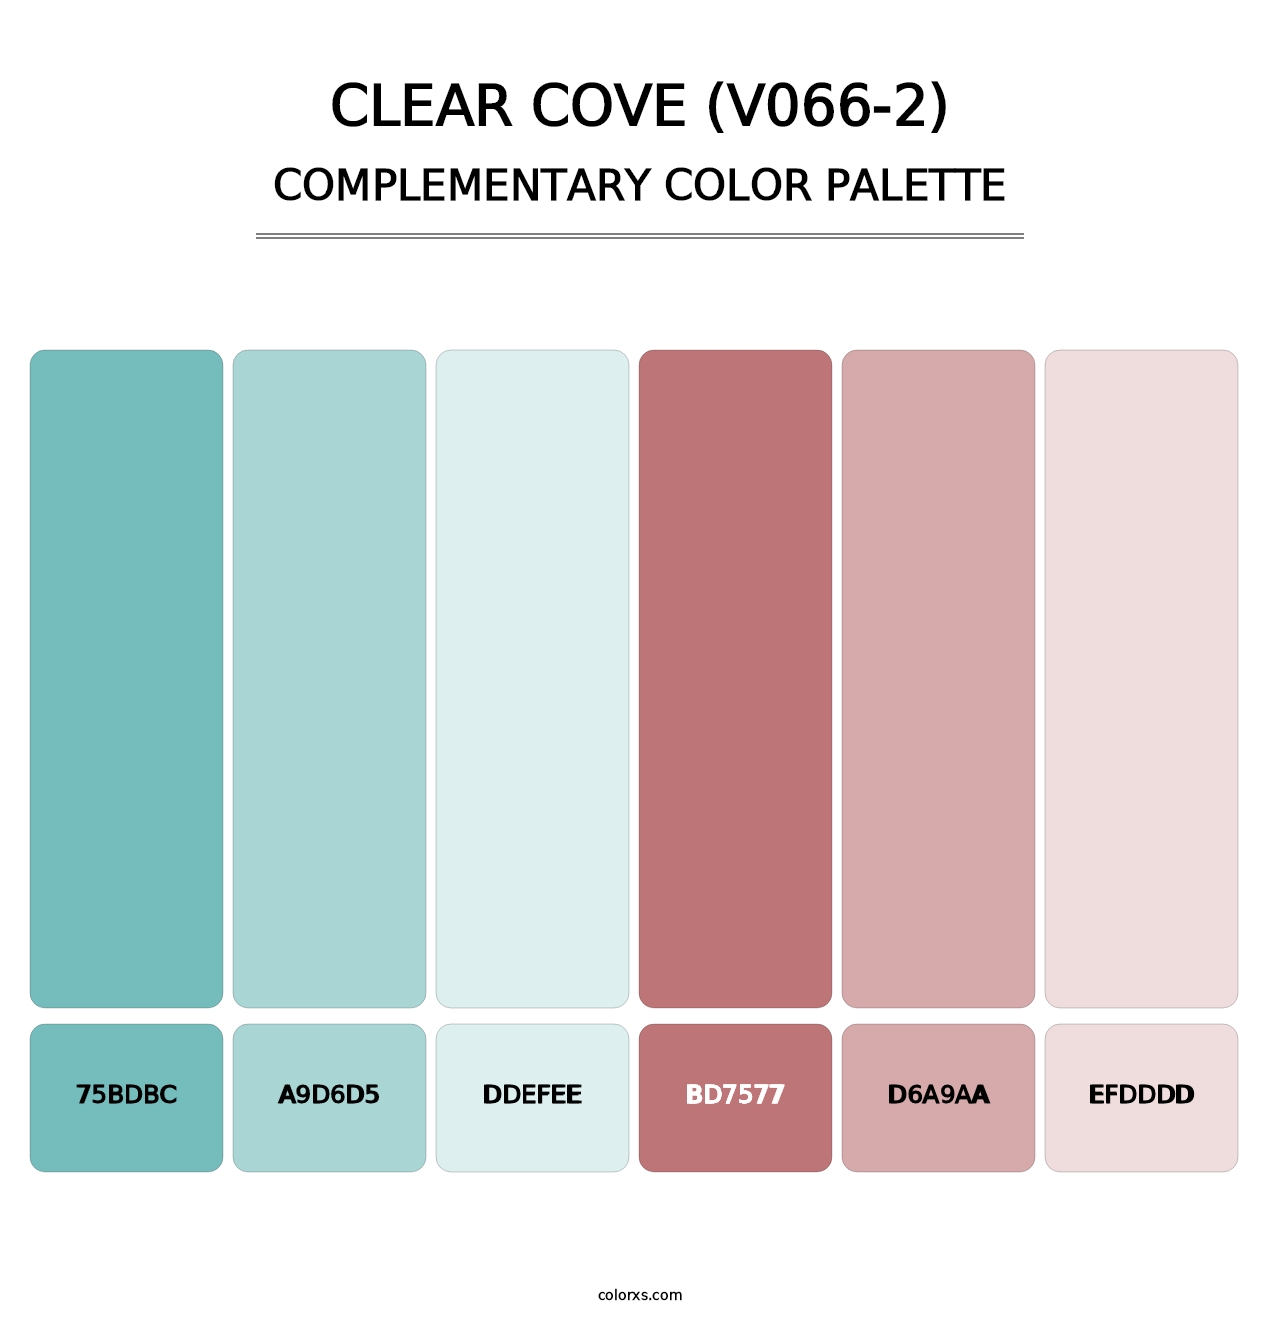 Clear Cove (V066-2) - Complementary Color Palette